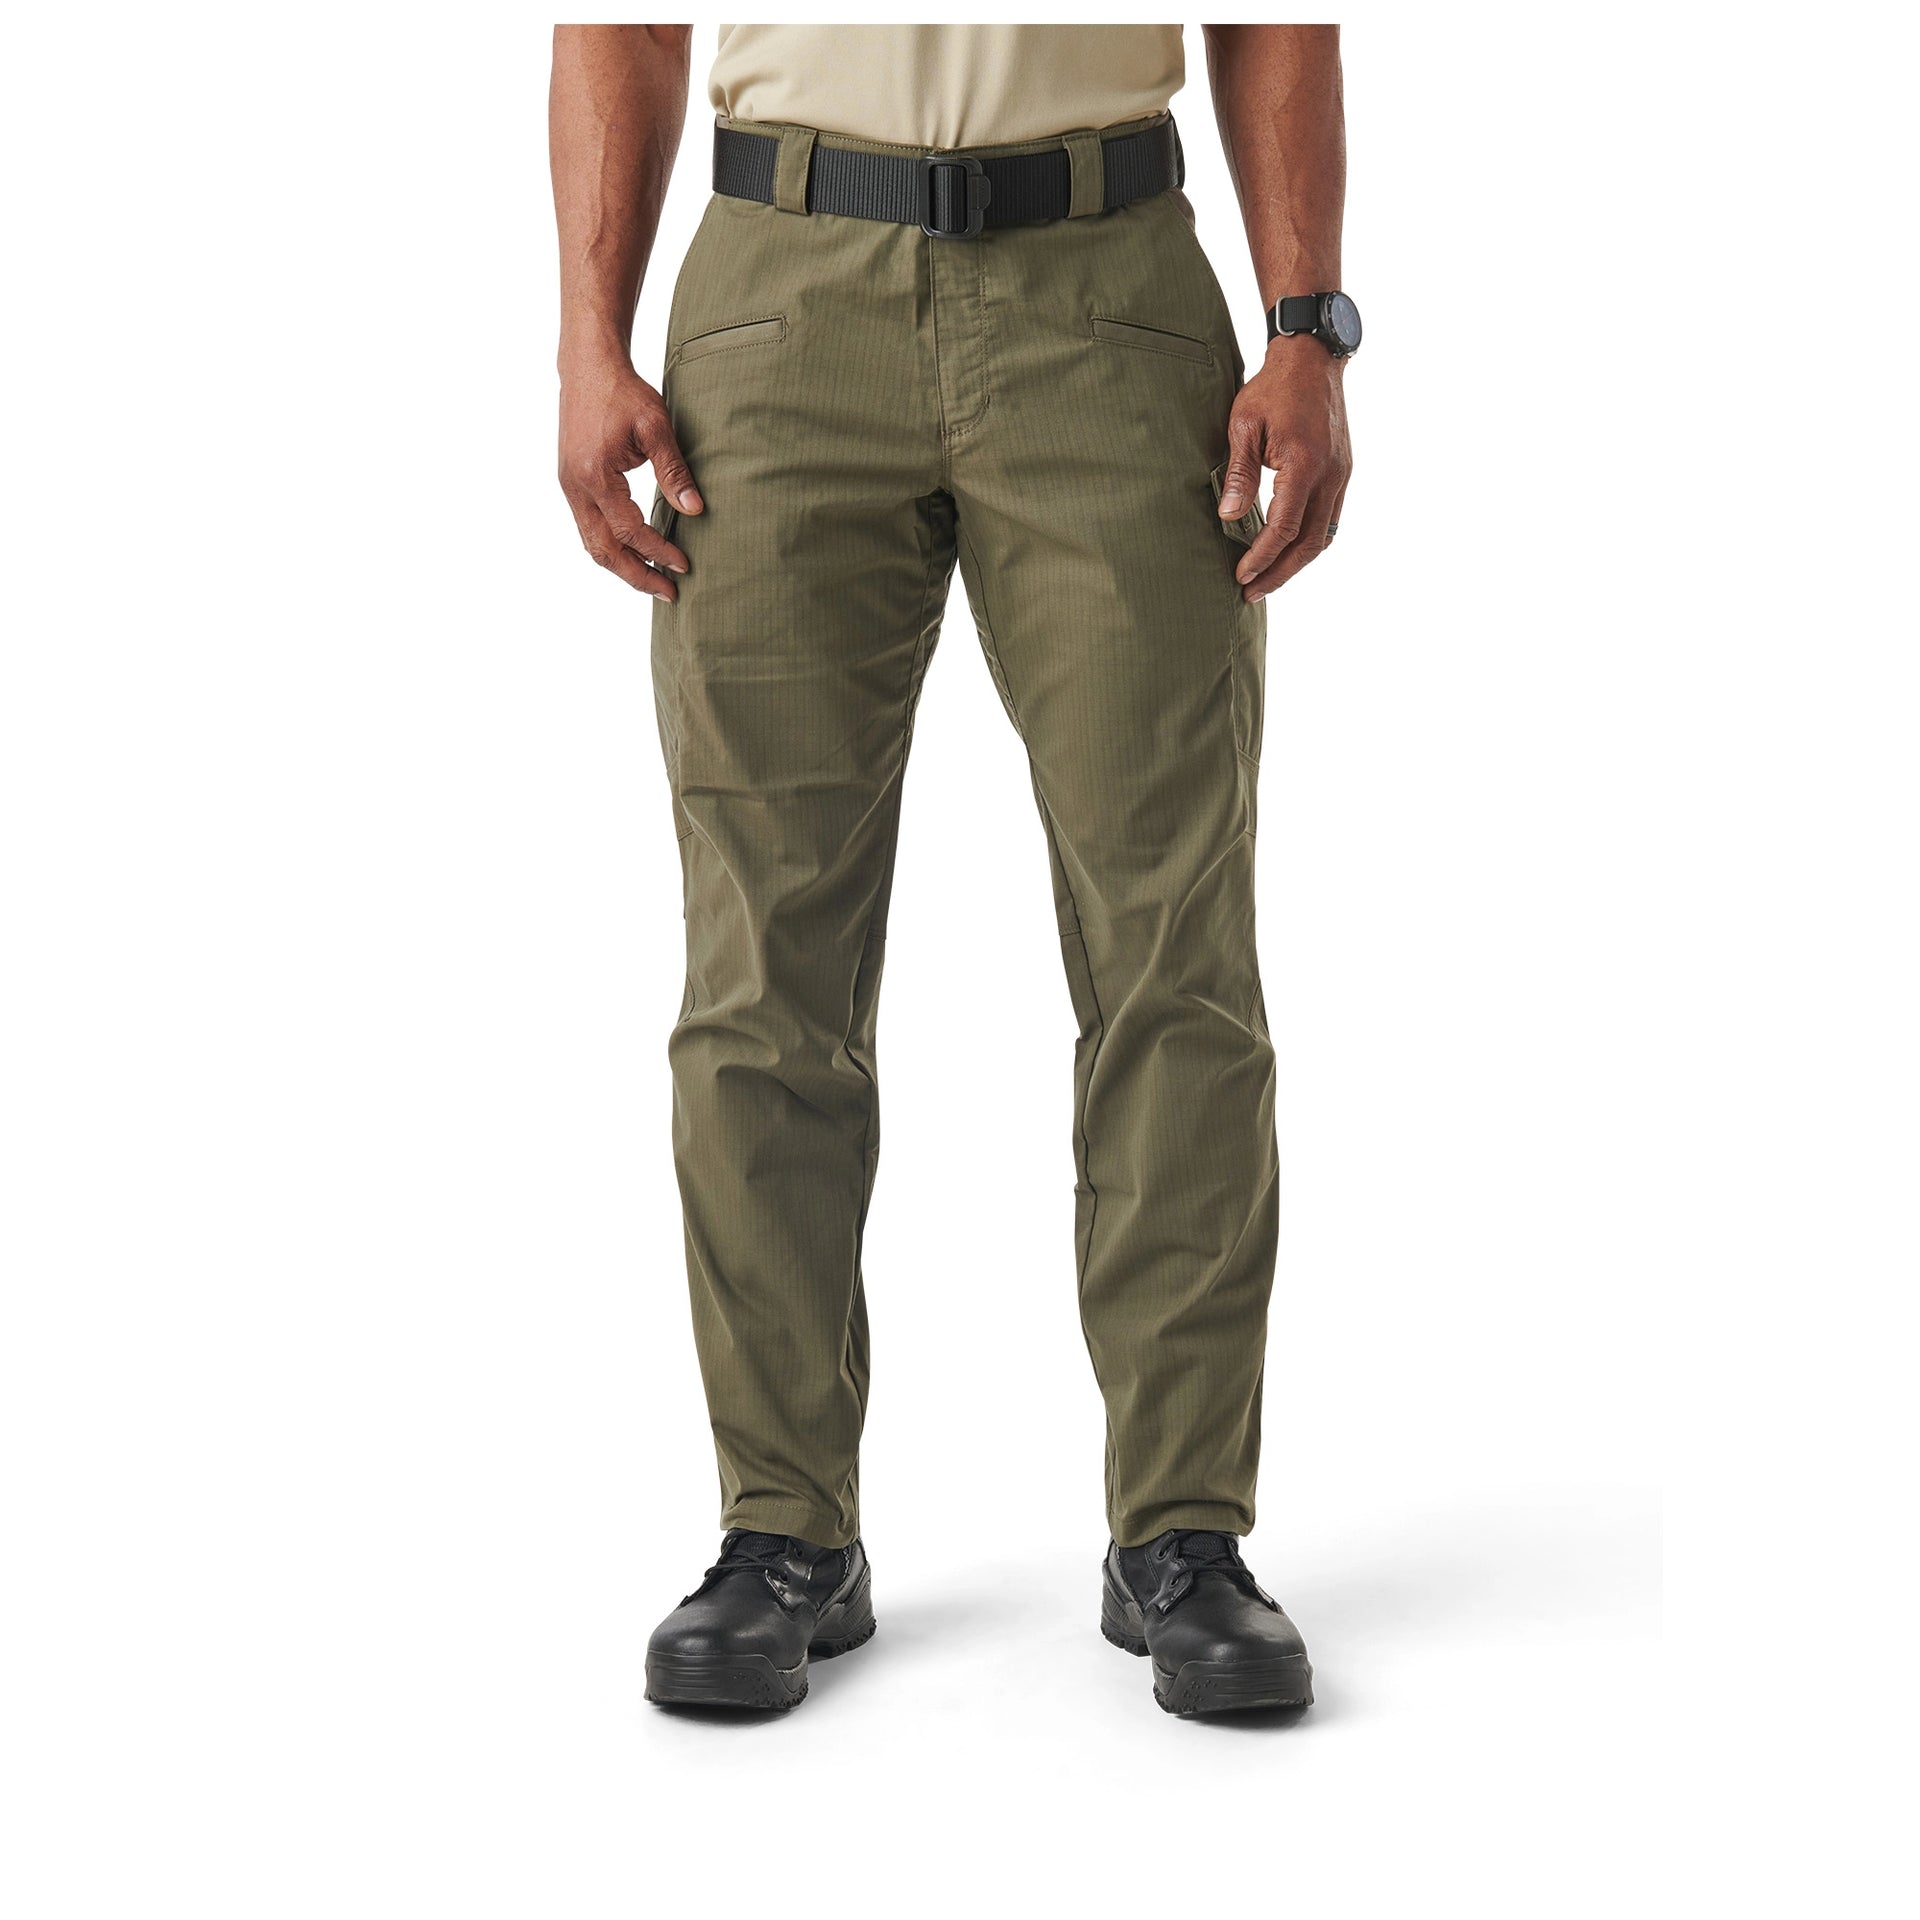 5.11 Tactical - Pants is where it all started. And to this